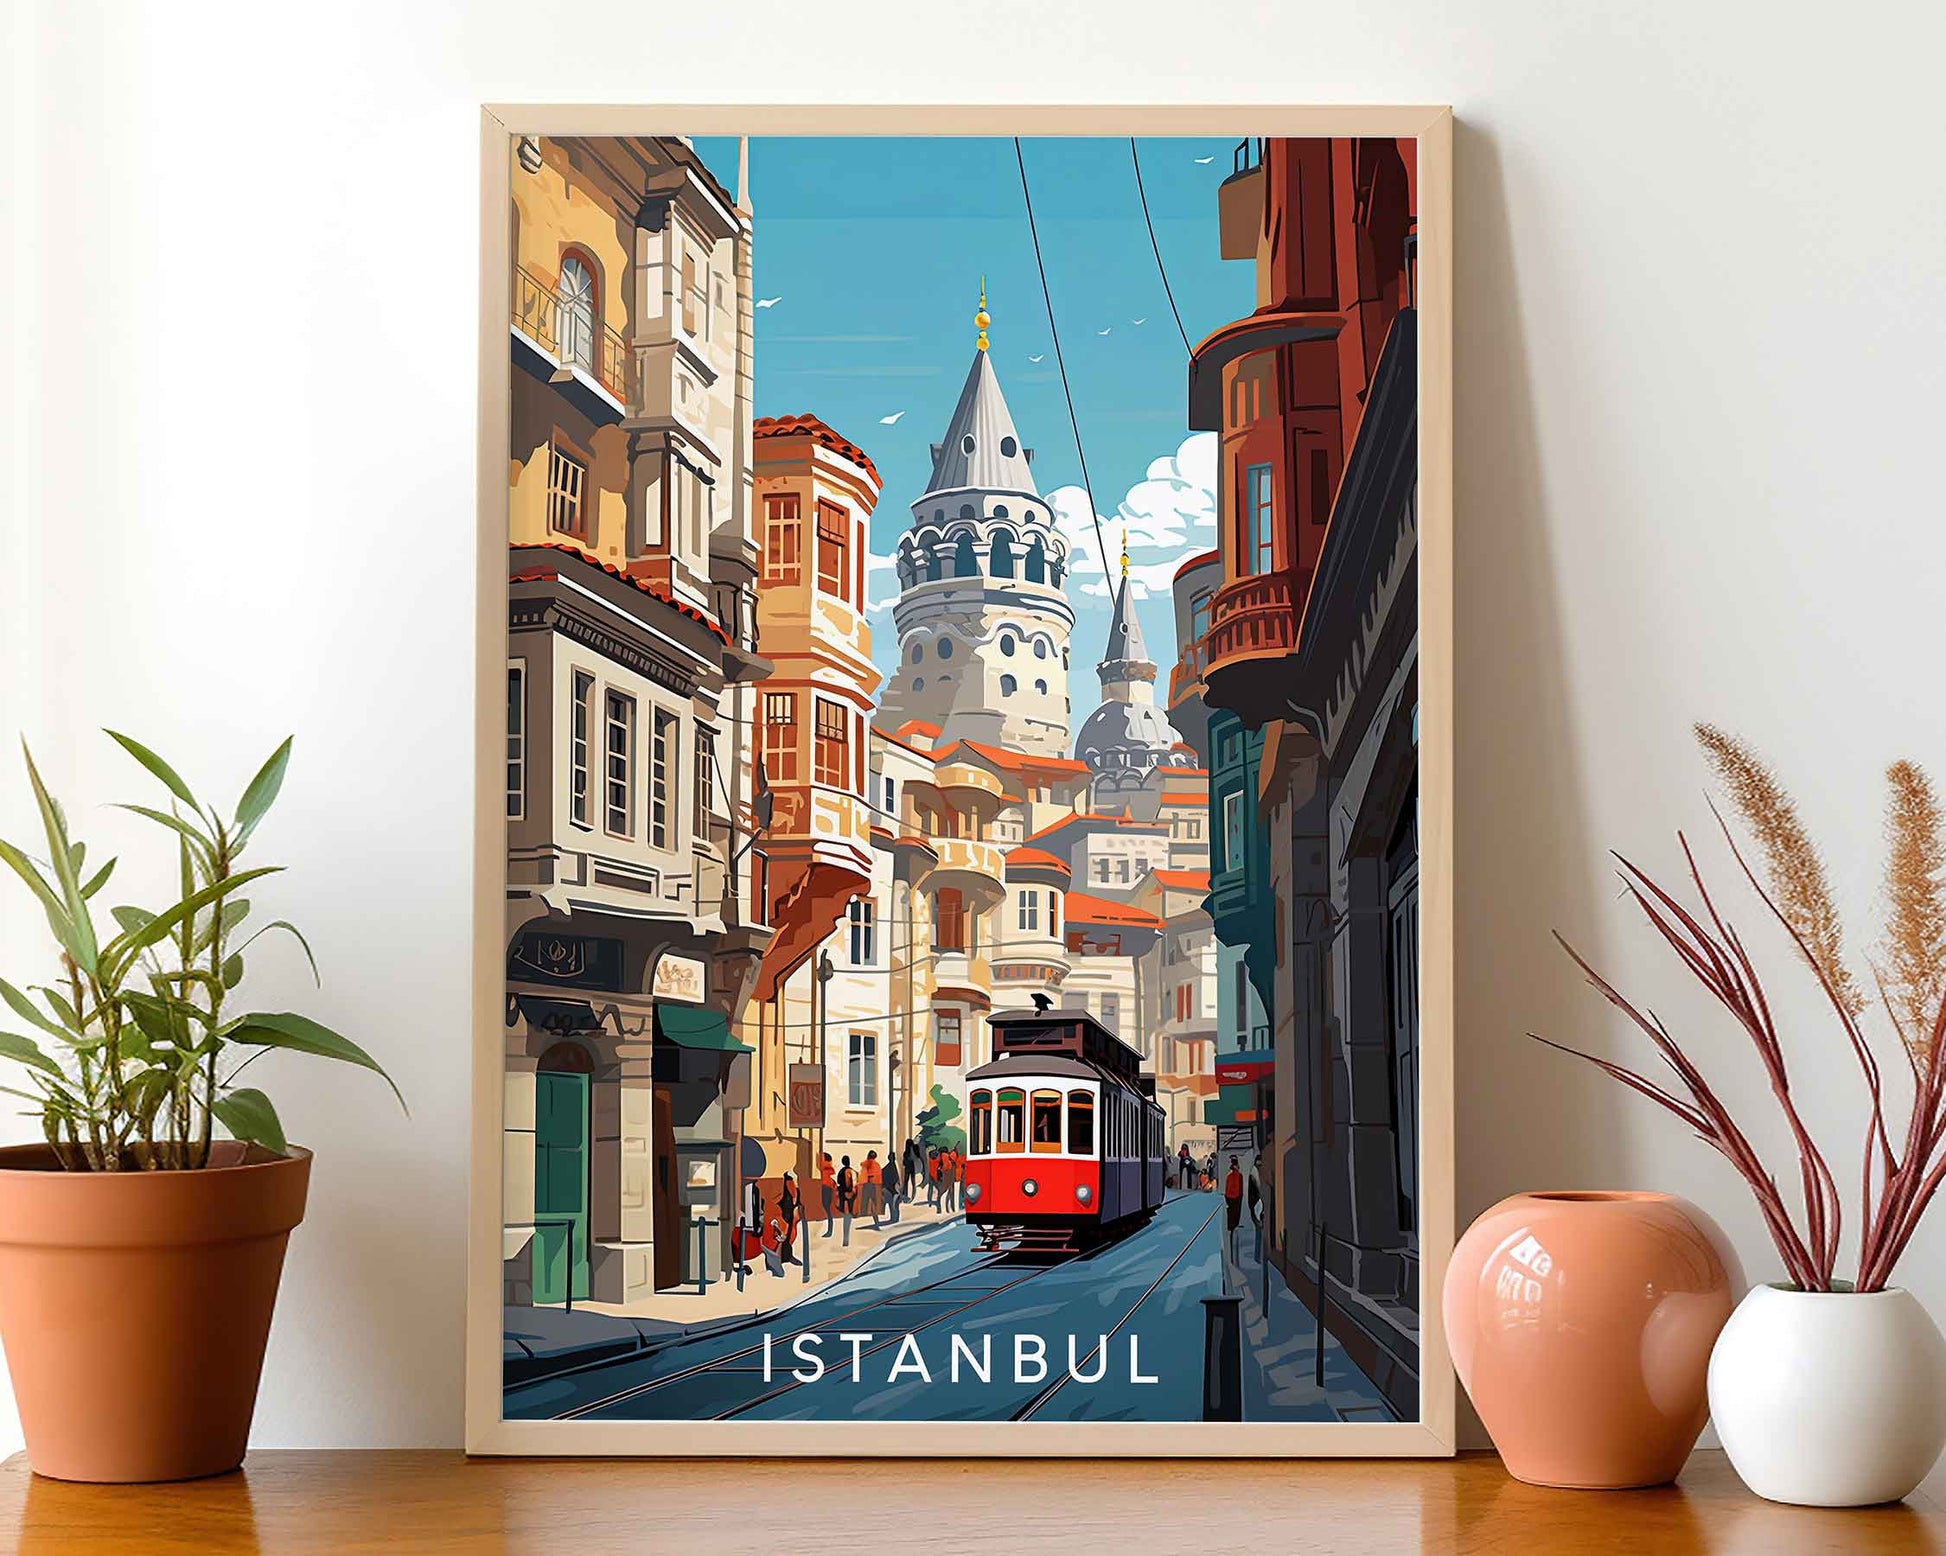 Framed Image of Istanbul Turkey Wall Art Print Travel Posters Illustration